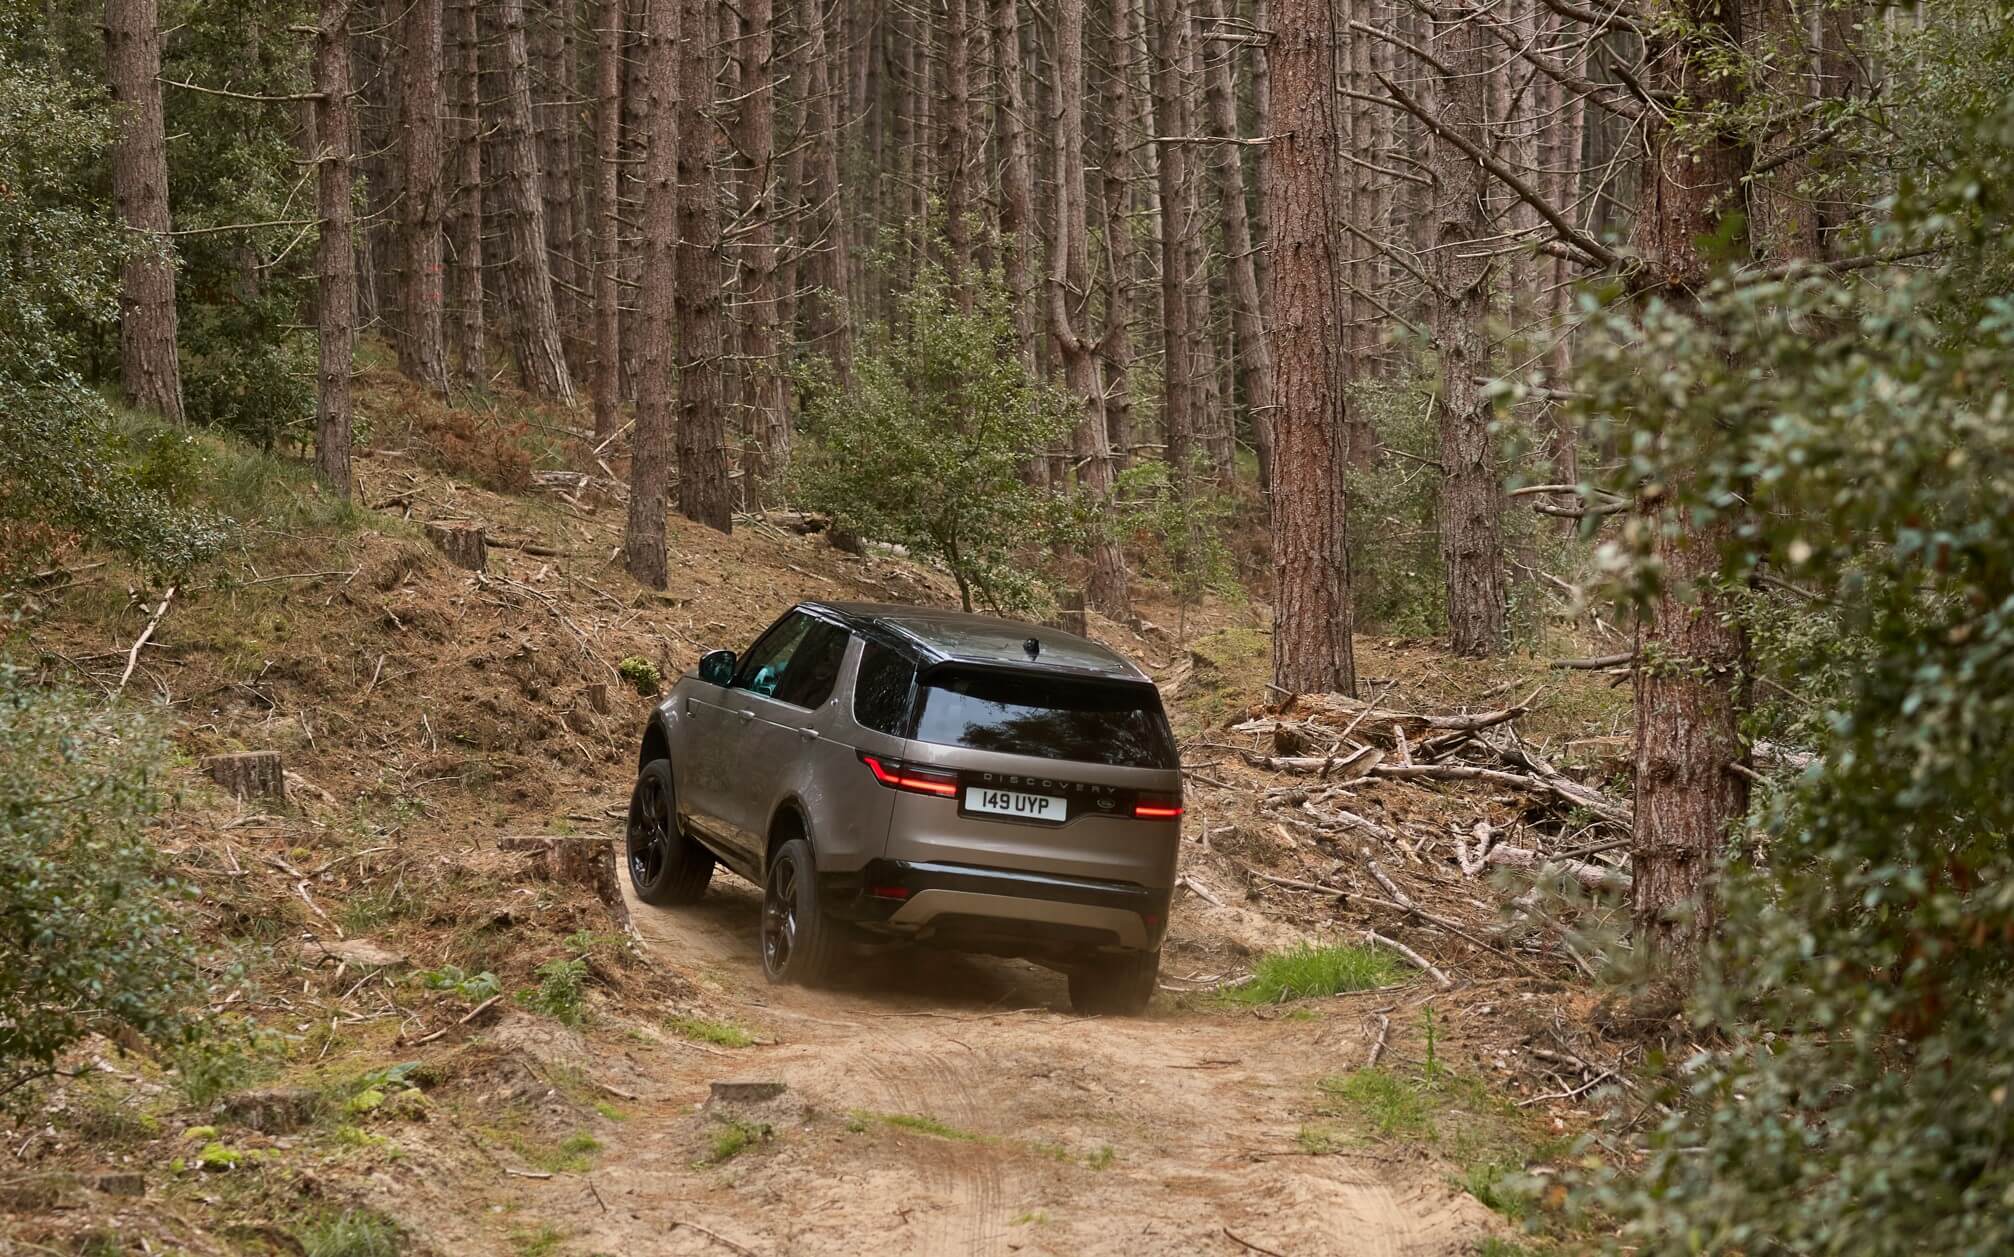 meisje beetje engel Will the Land Rover Discovery return to glory? - Automotive Daily